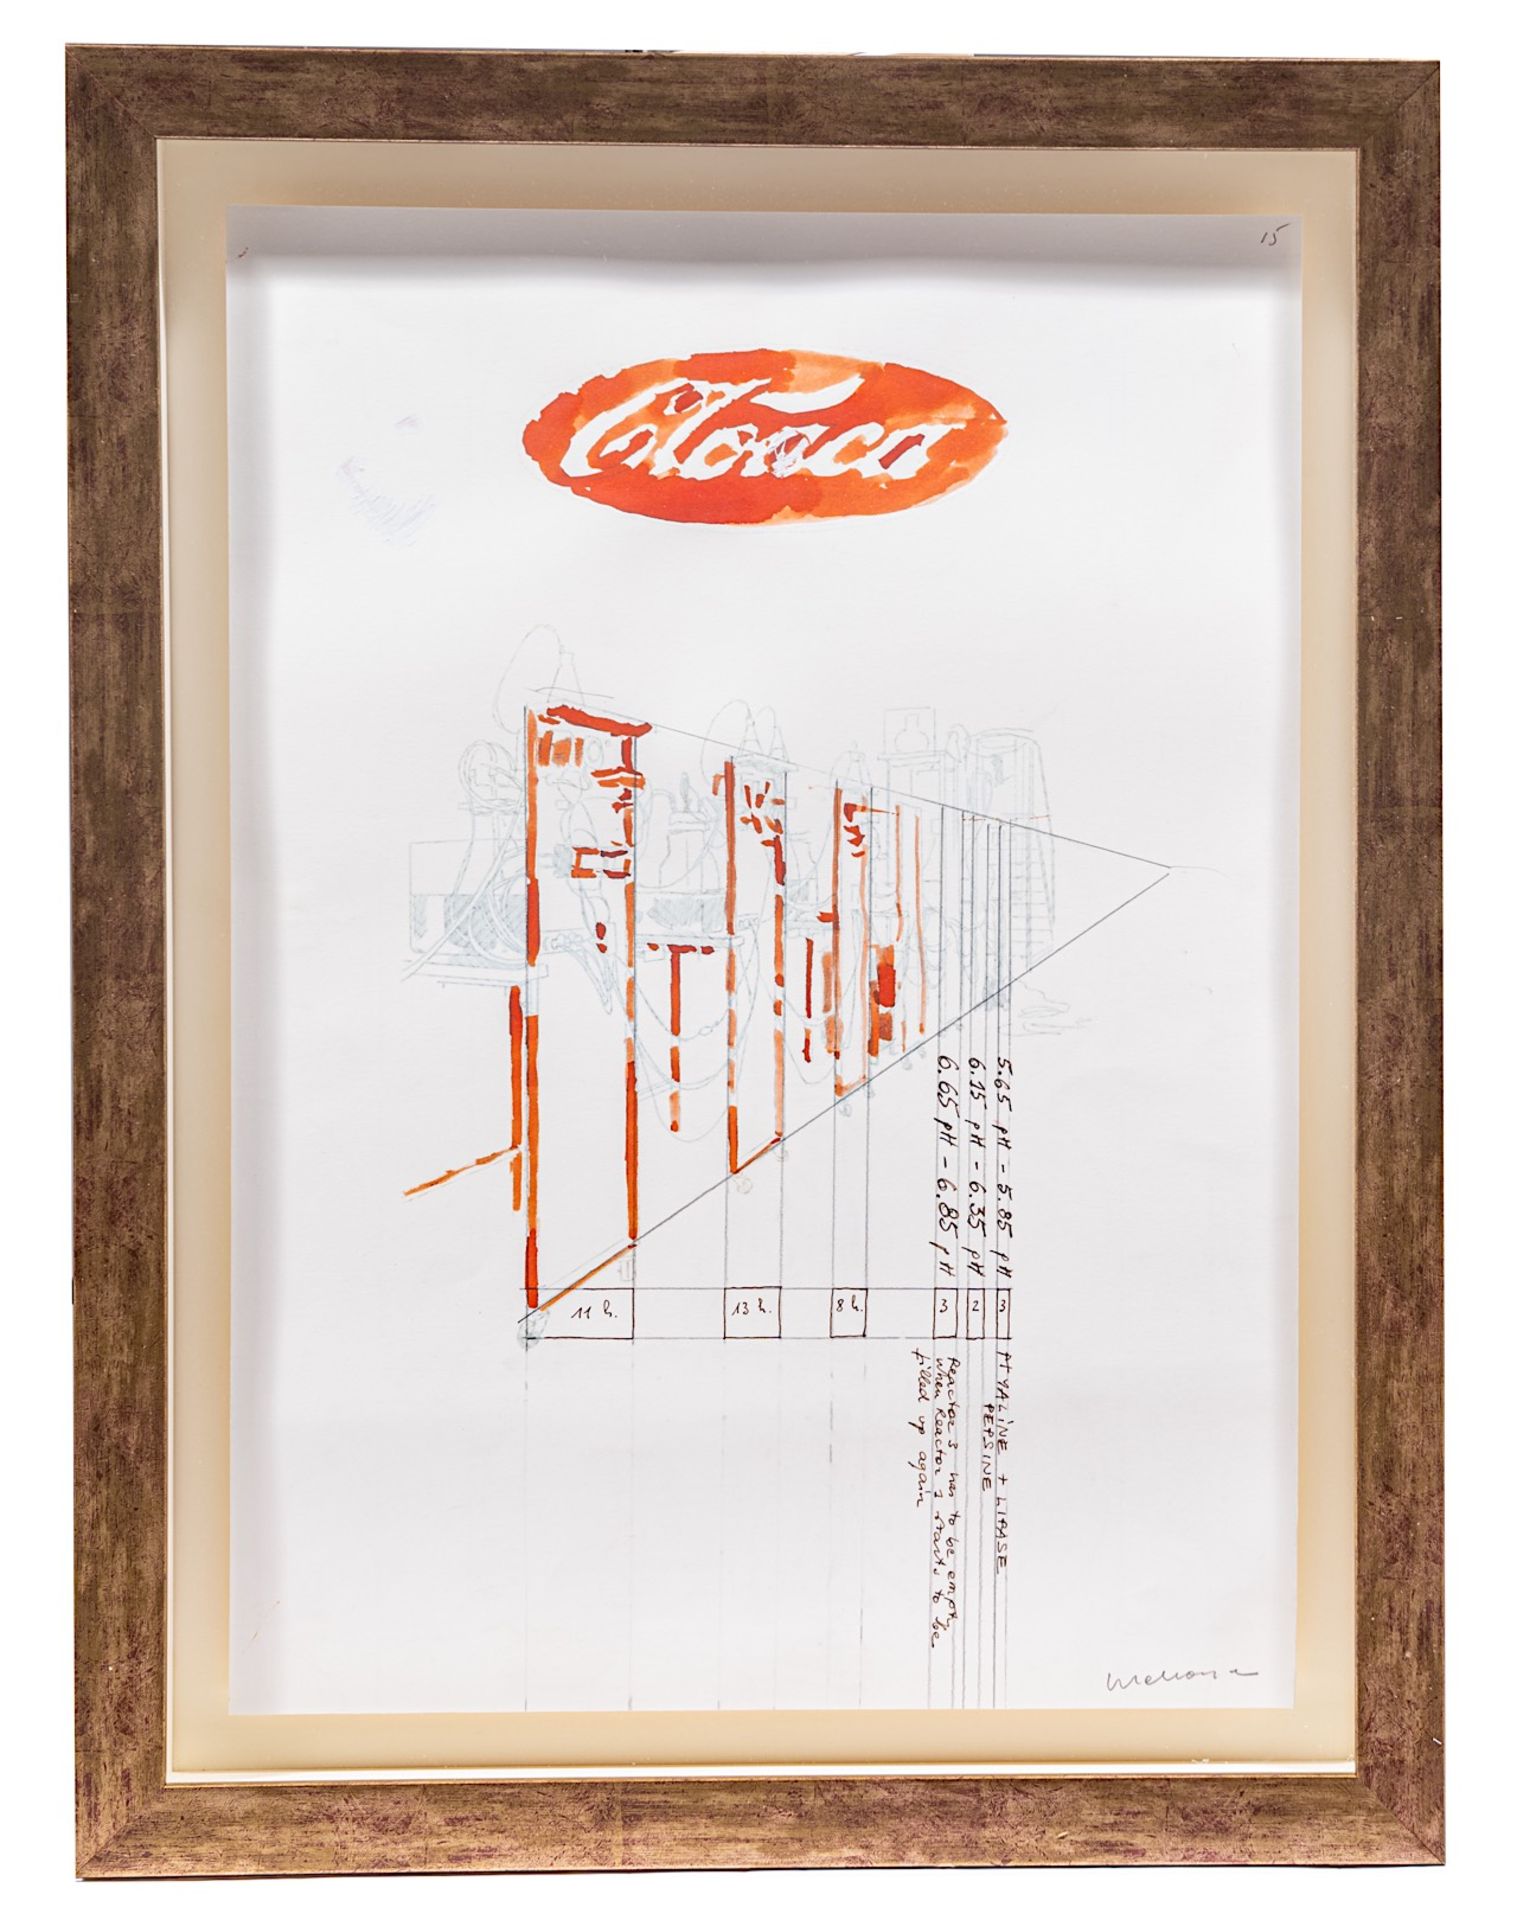 Wim Delvoye (1965), Cloaca, ink and watercolour drawing 58 x 42 cm. (22.8 x 16.5 in.), Frame: 72 x 5 - Bild 2 aus 6